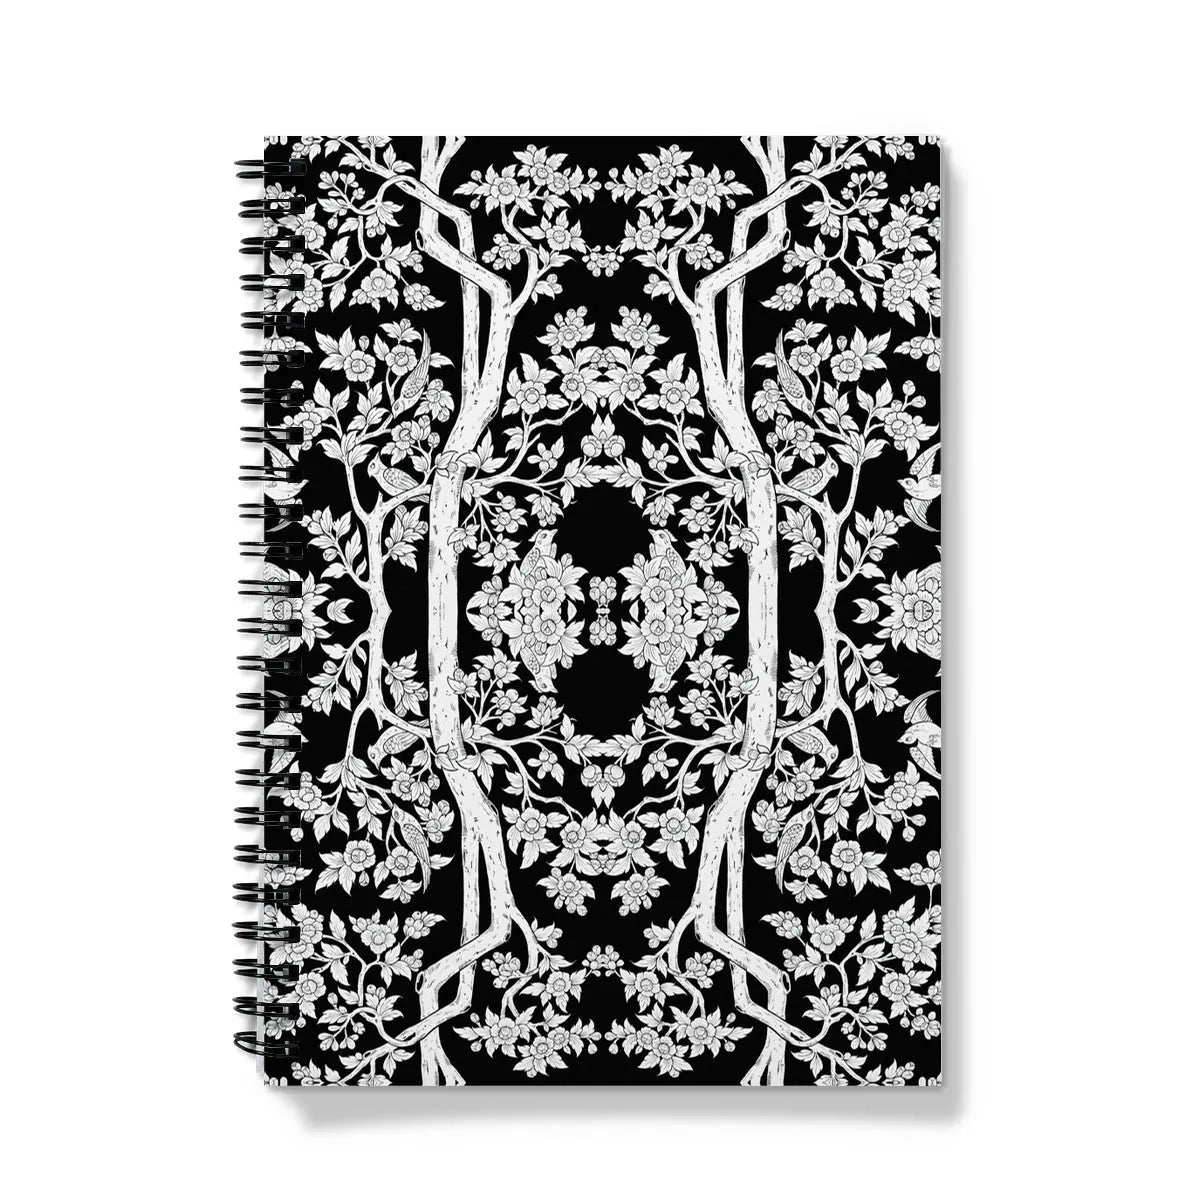 Aviary Black Notebook - A5 - Graph Paper - Notebooks & Notepads - Aesthetic Art